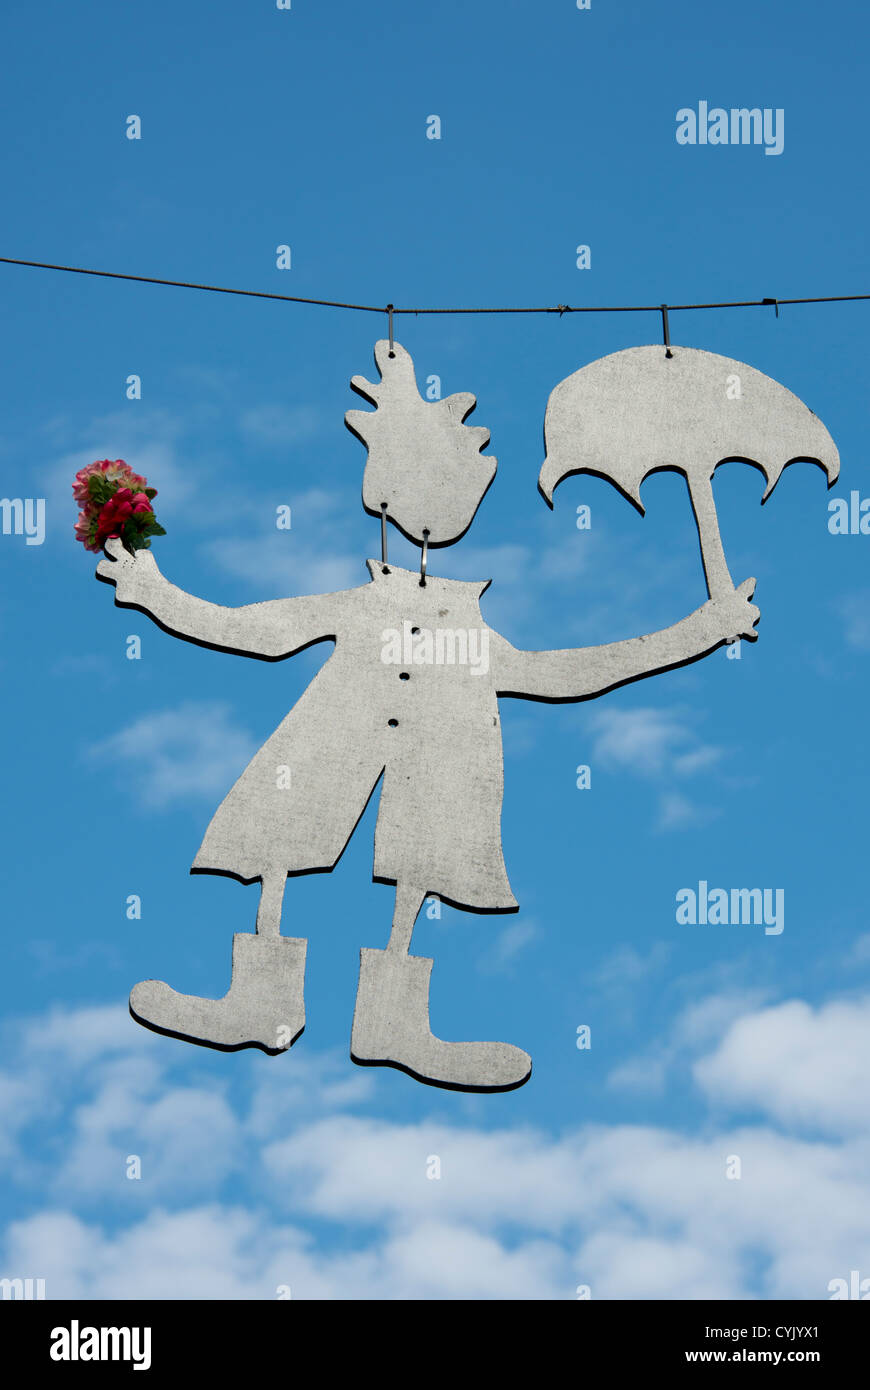 Canada, Quebec, Quebec City. Whimsical metal hanging art figure with flowers, raincoat. Stock Photo